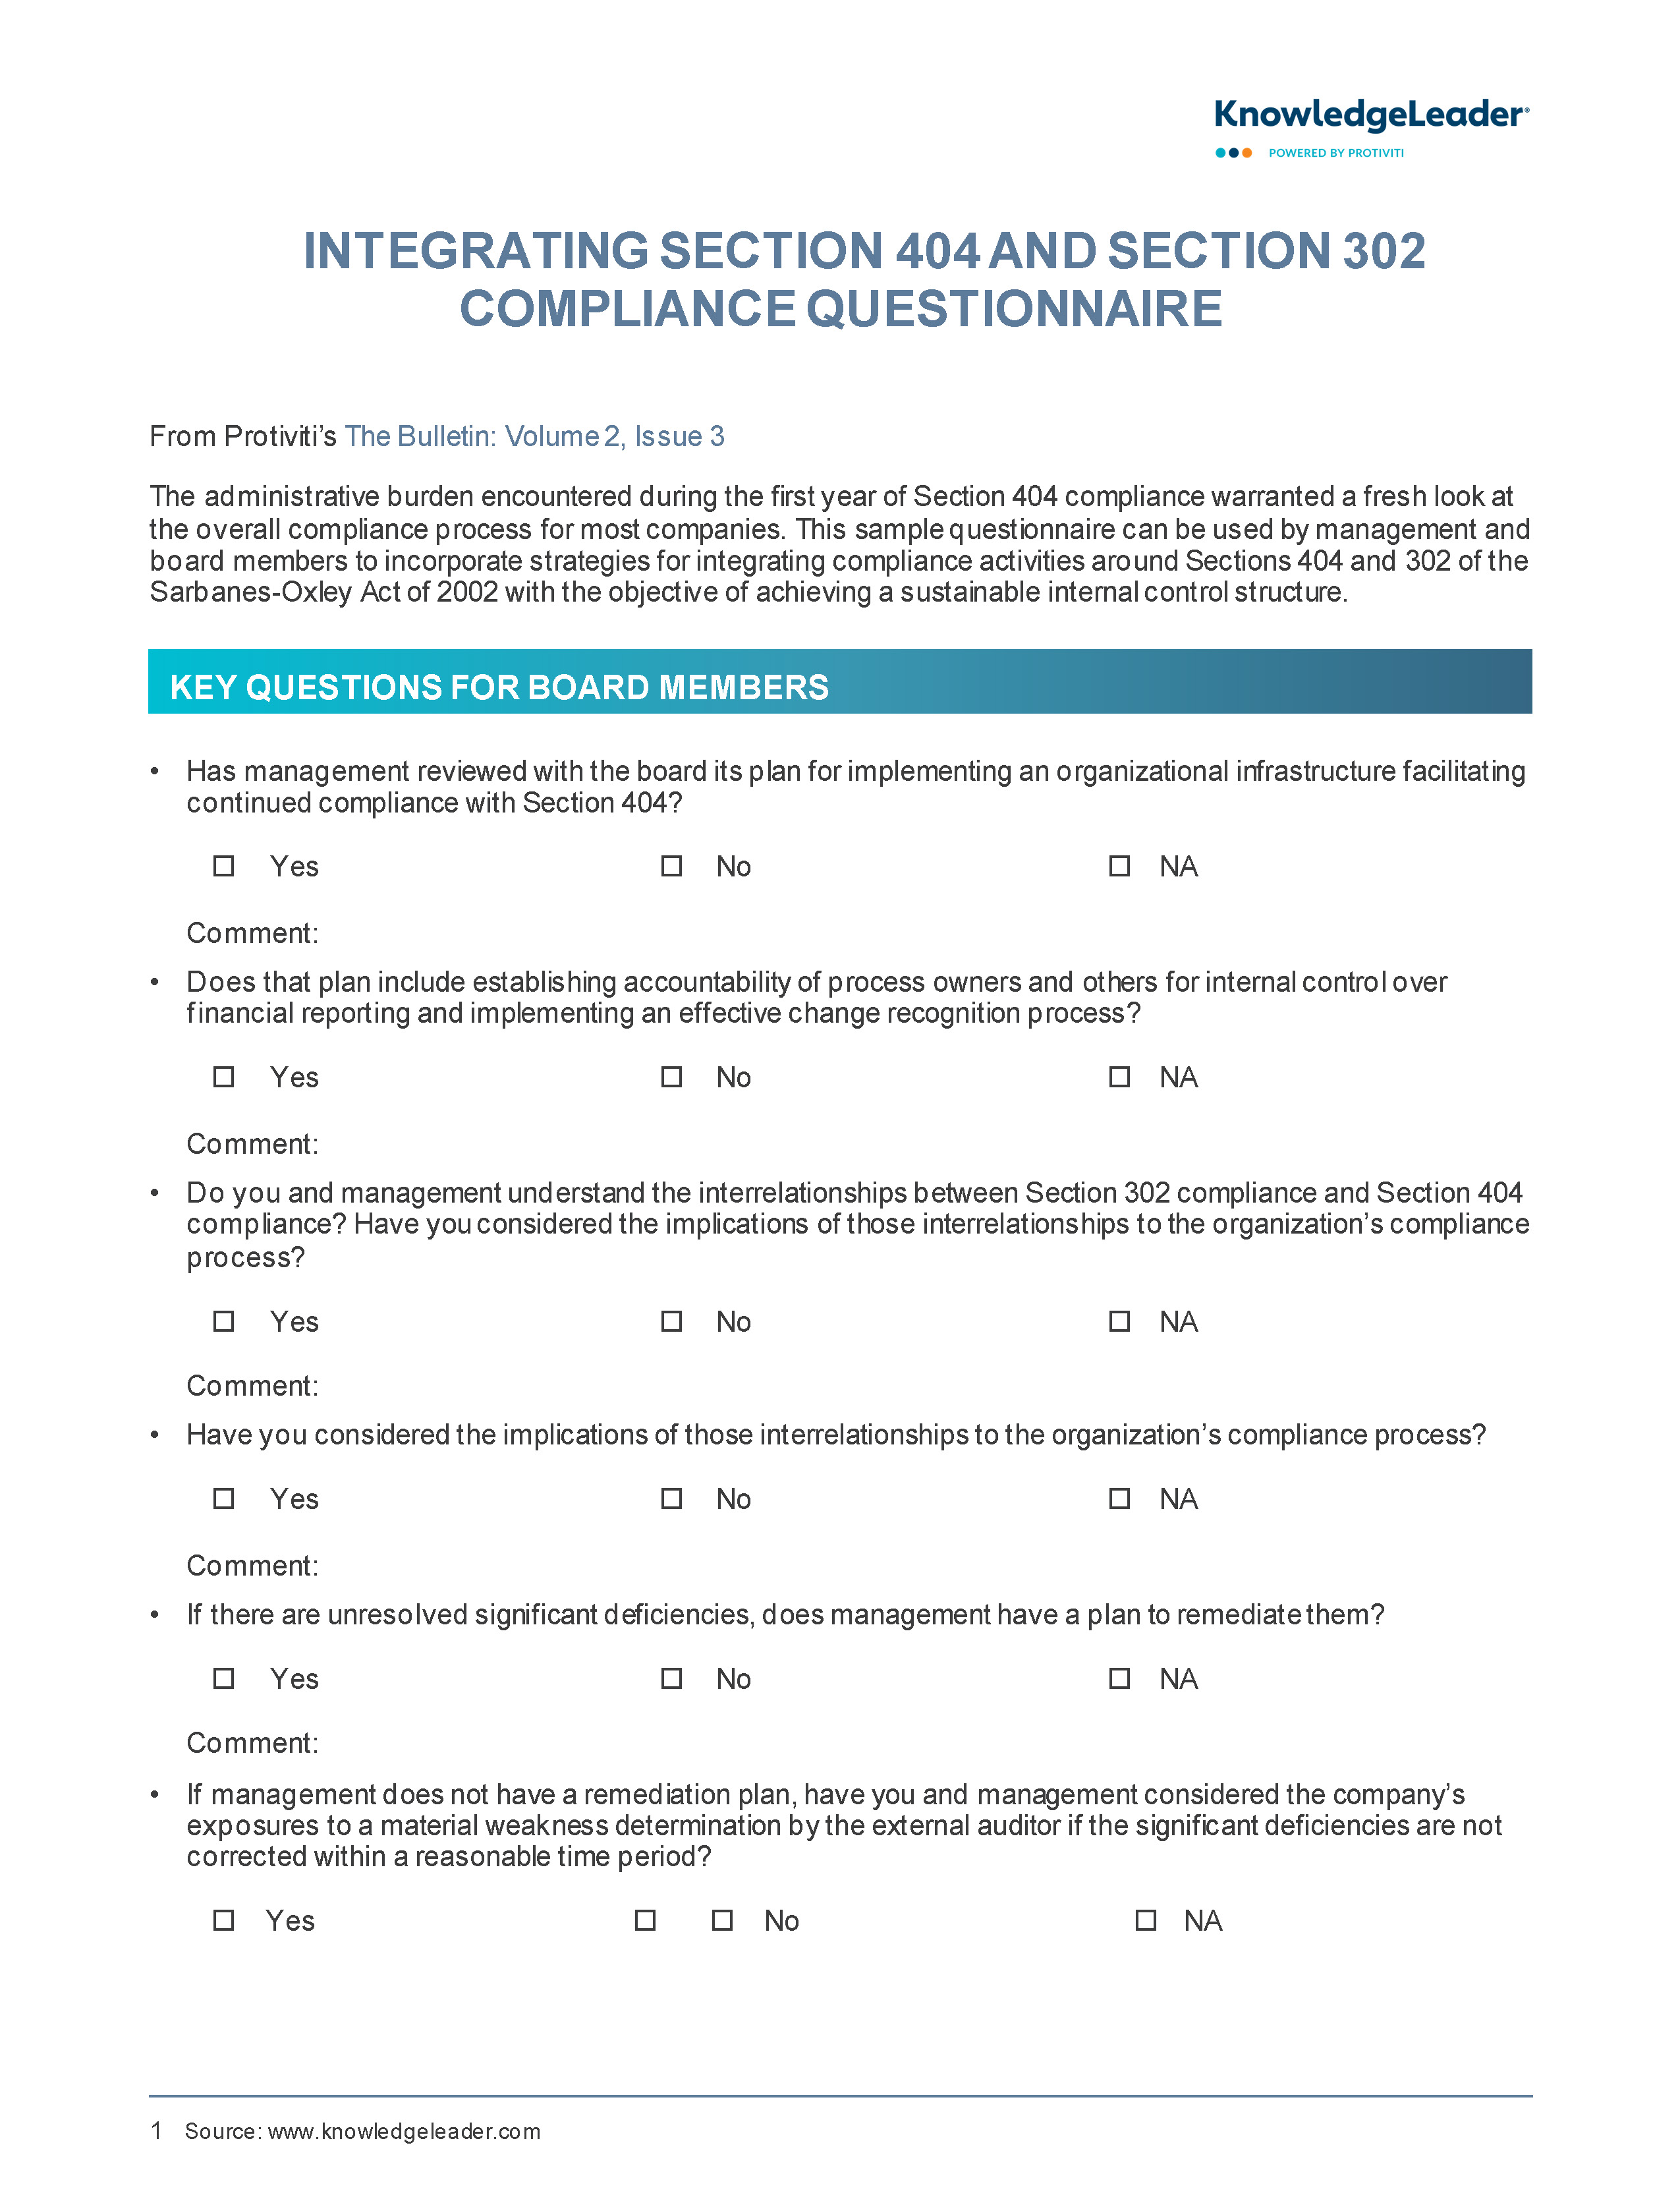 Screenshot of the first page of Integrating Section 404 and Section 302 Compliance Questionnaire